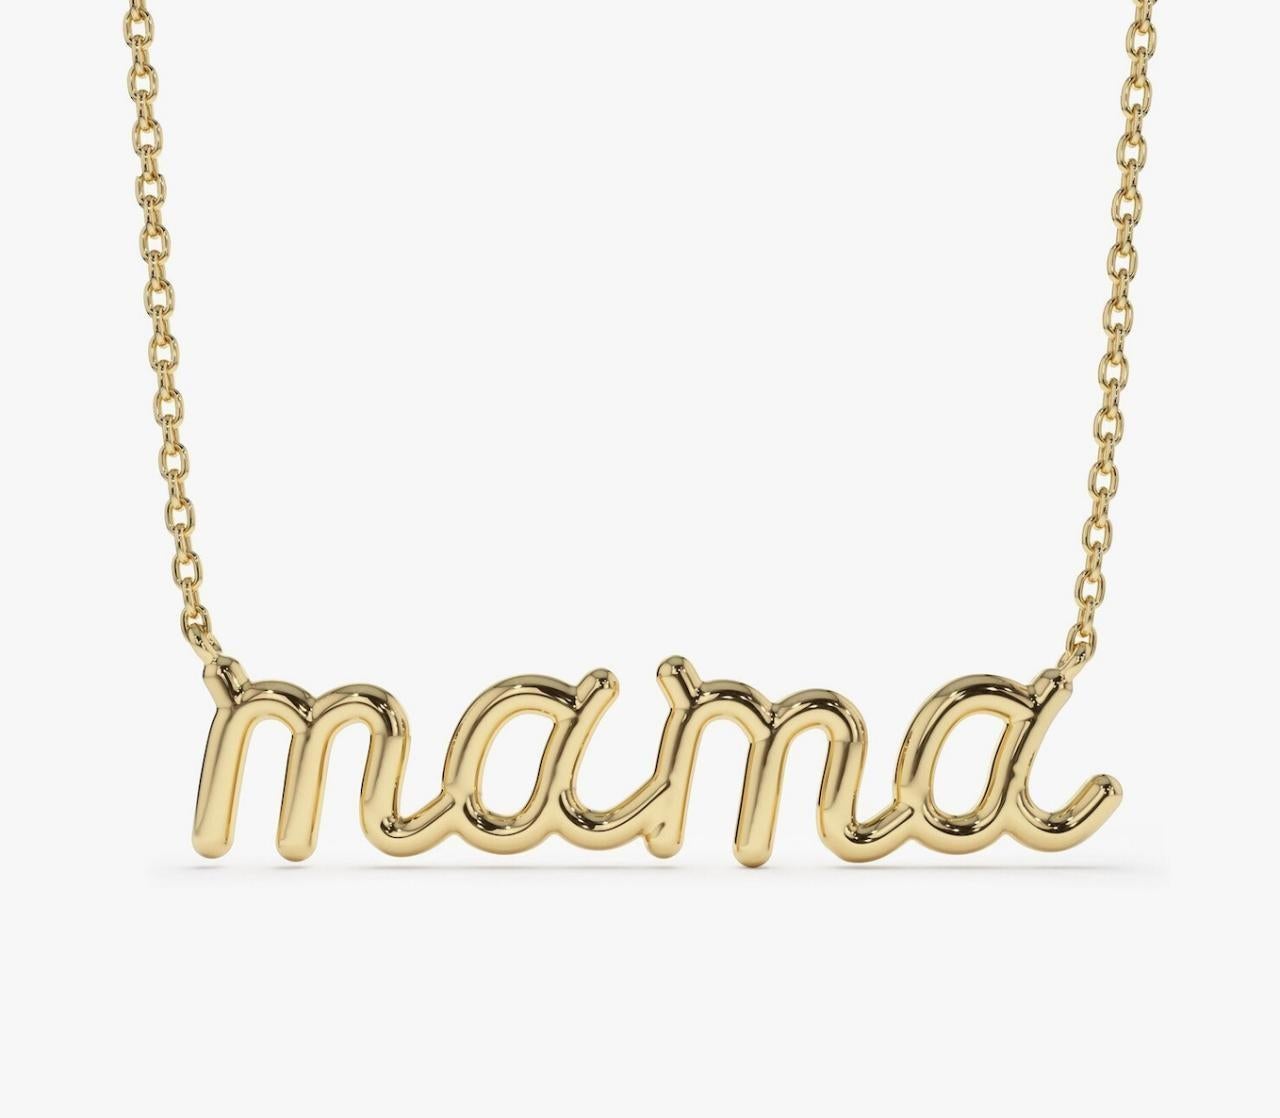 Necklace Information
Metal : 14k
Metal Color  : Yellow Gold
Dimensions : 6X28.5MM
Length : 18 Inches
 

JEWELRY CARE
Over the course of time, body oil and skin products can collect on Jewelry and leave a residue which can occlude stones. To keep